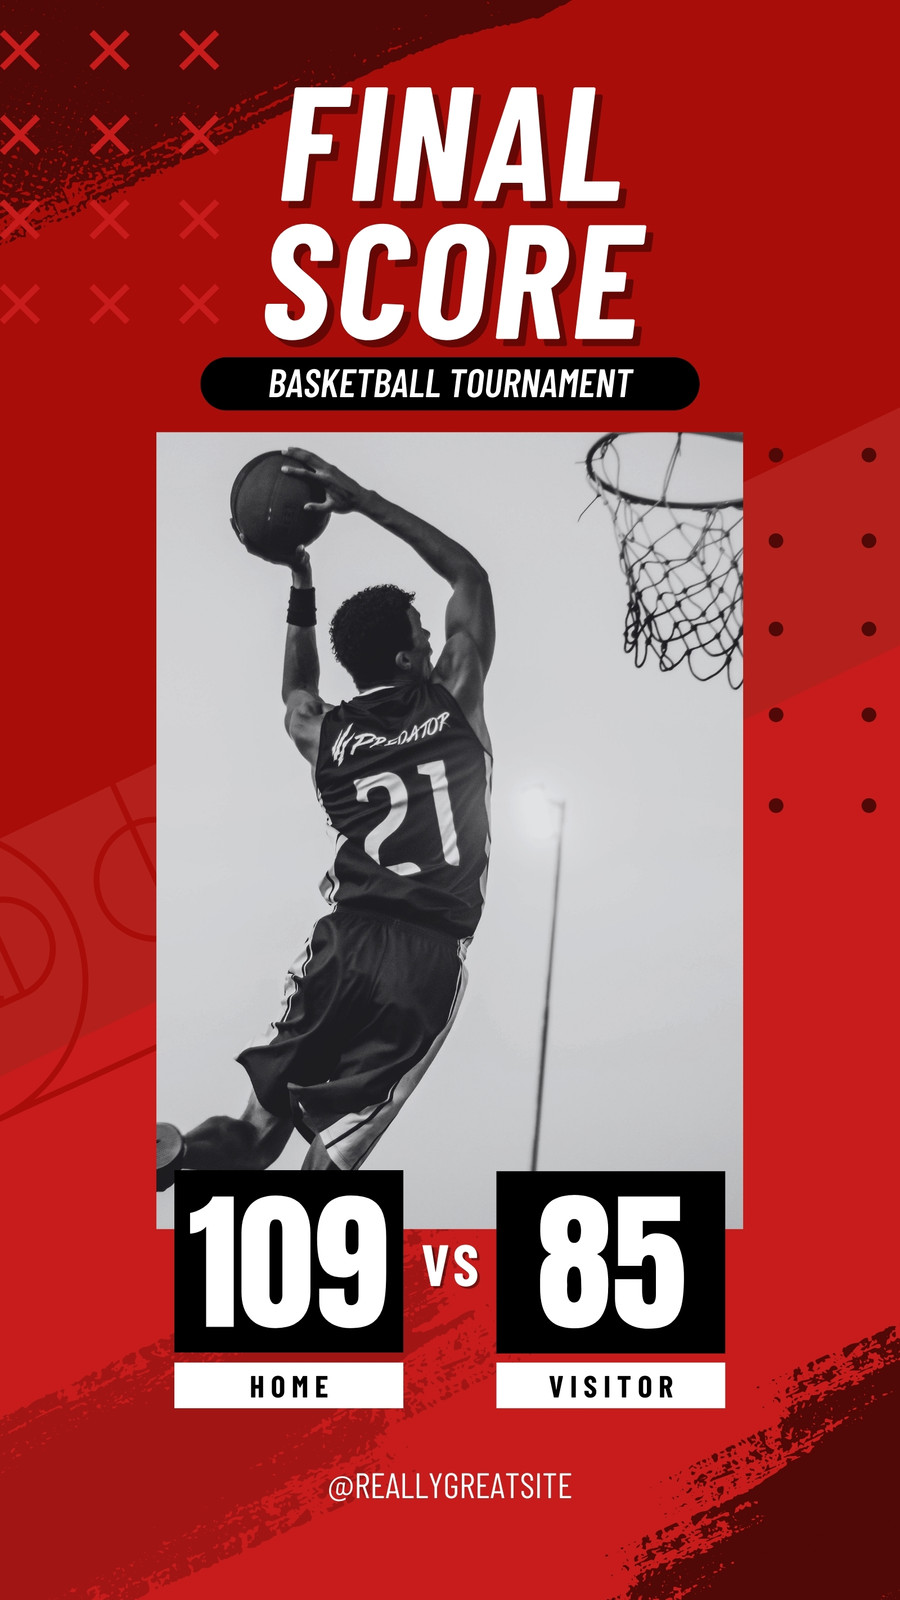 Basketball Game Result Template - Kickly